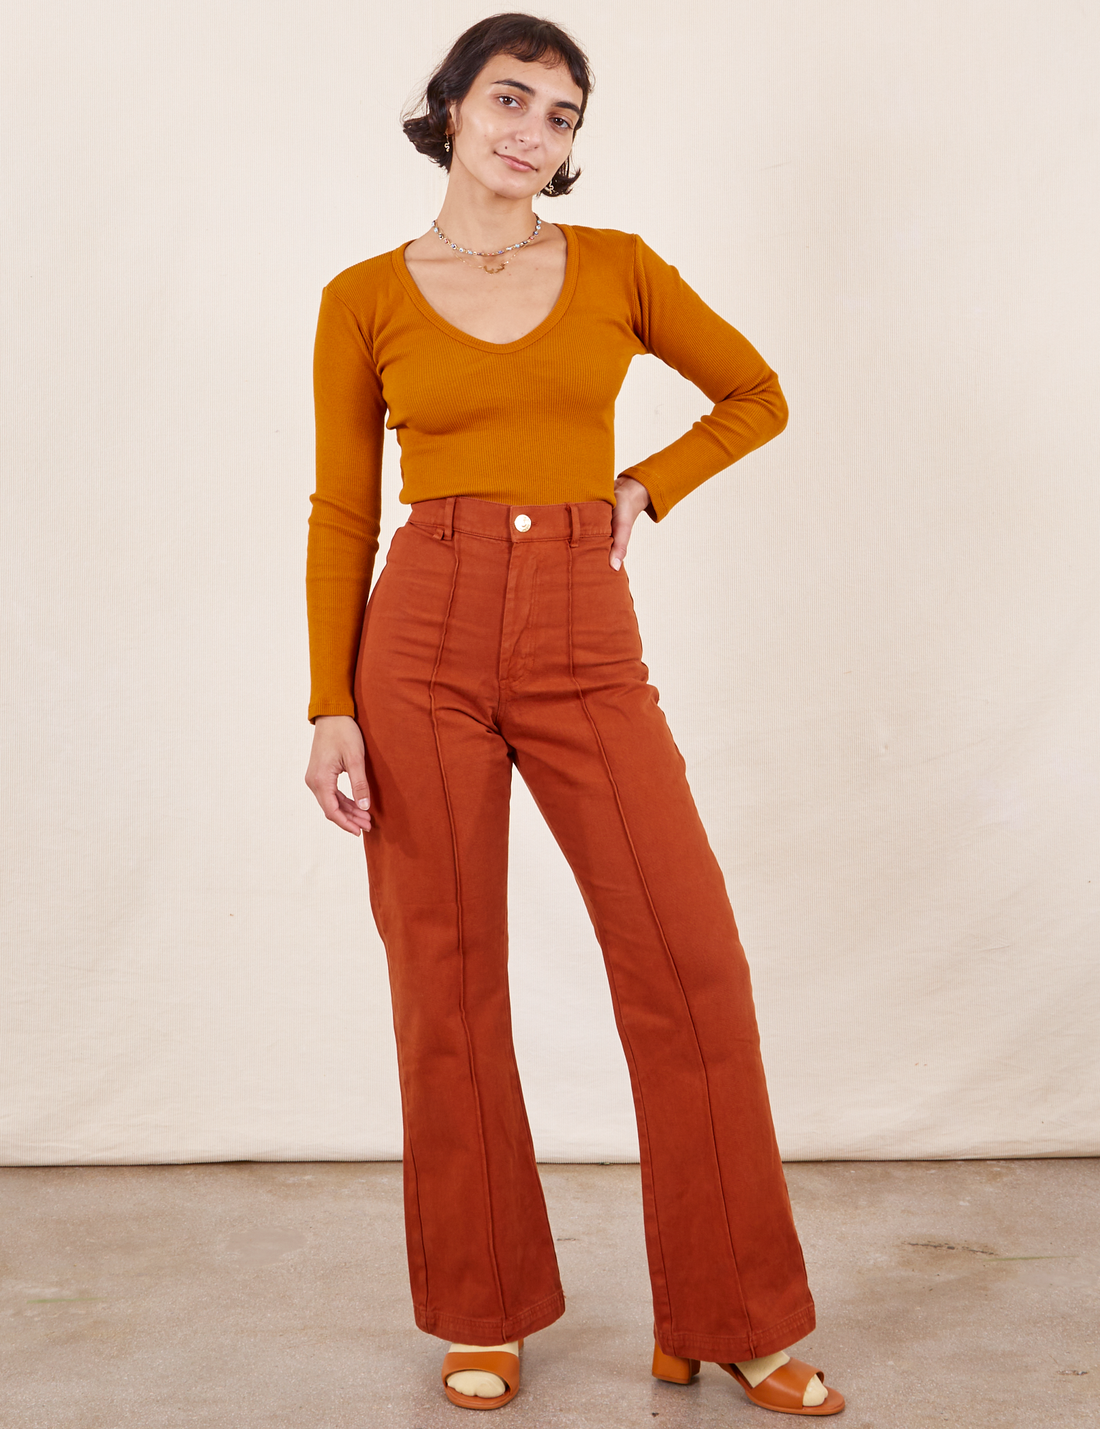 Soraya is 5'2" and wearing XXS Petite Western Pants in Burnt Terracotta paired with a burnt orange Long Sleeve V-Neck Tee. 